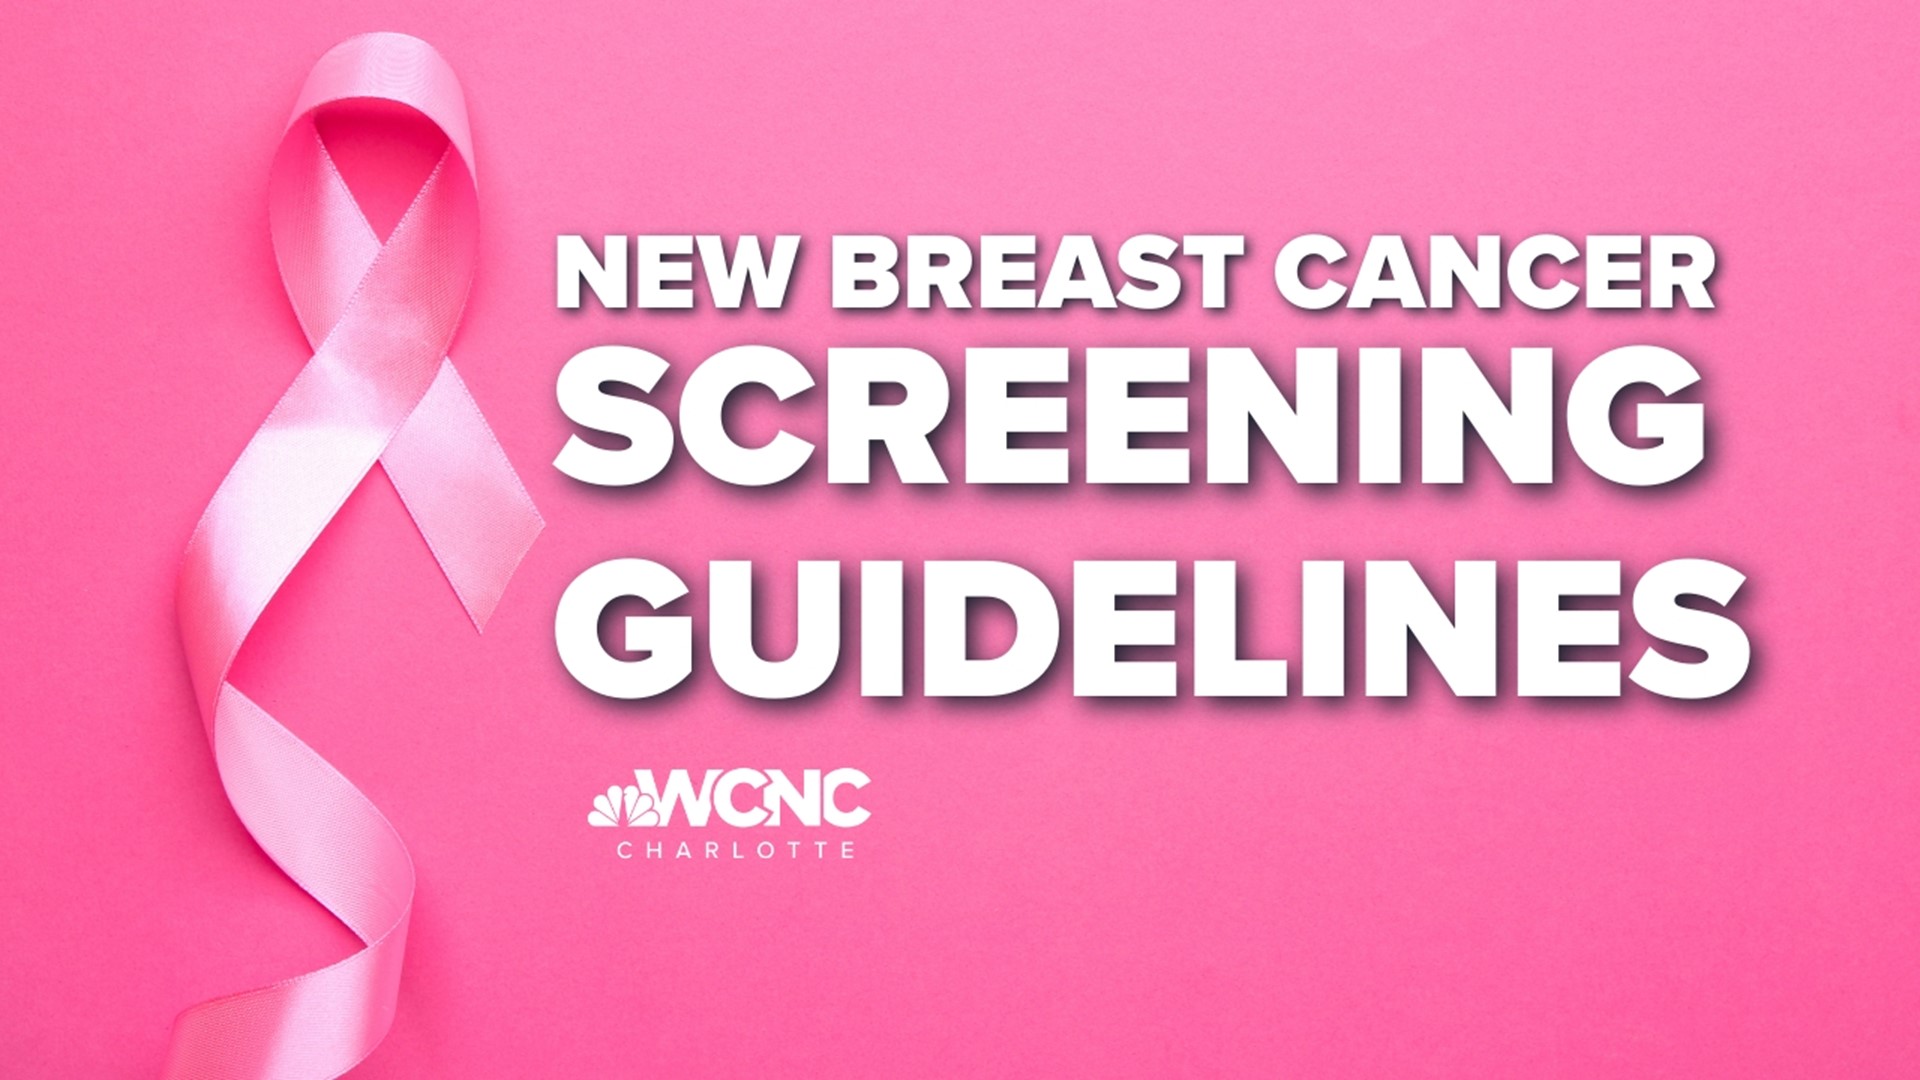 Officials said you should start getting mammograms at the age of 40 instead of 50 years old.